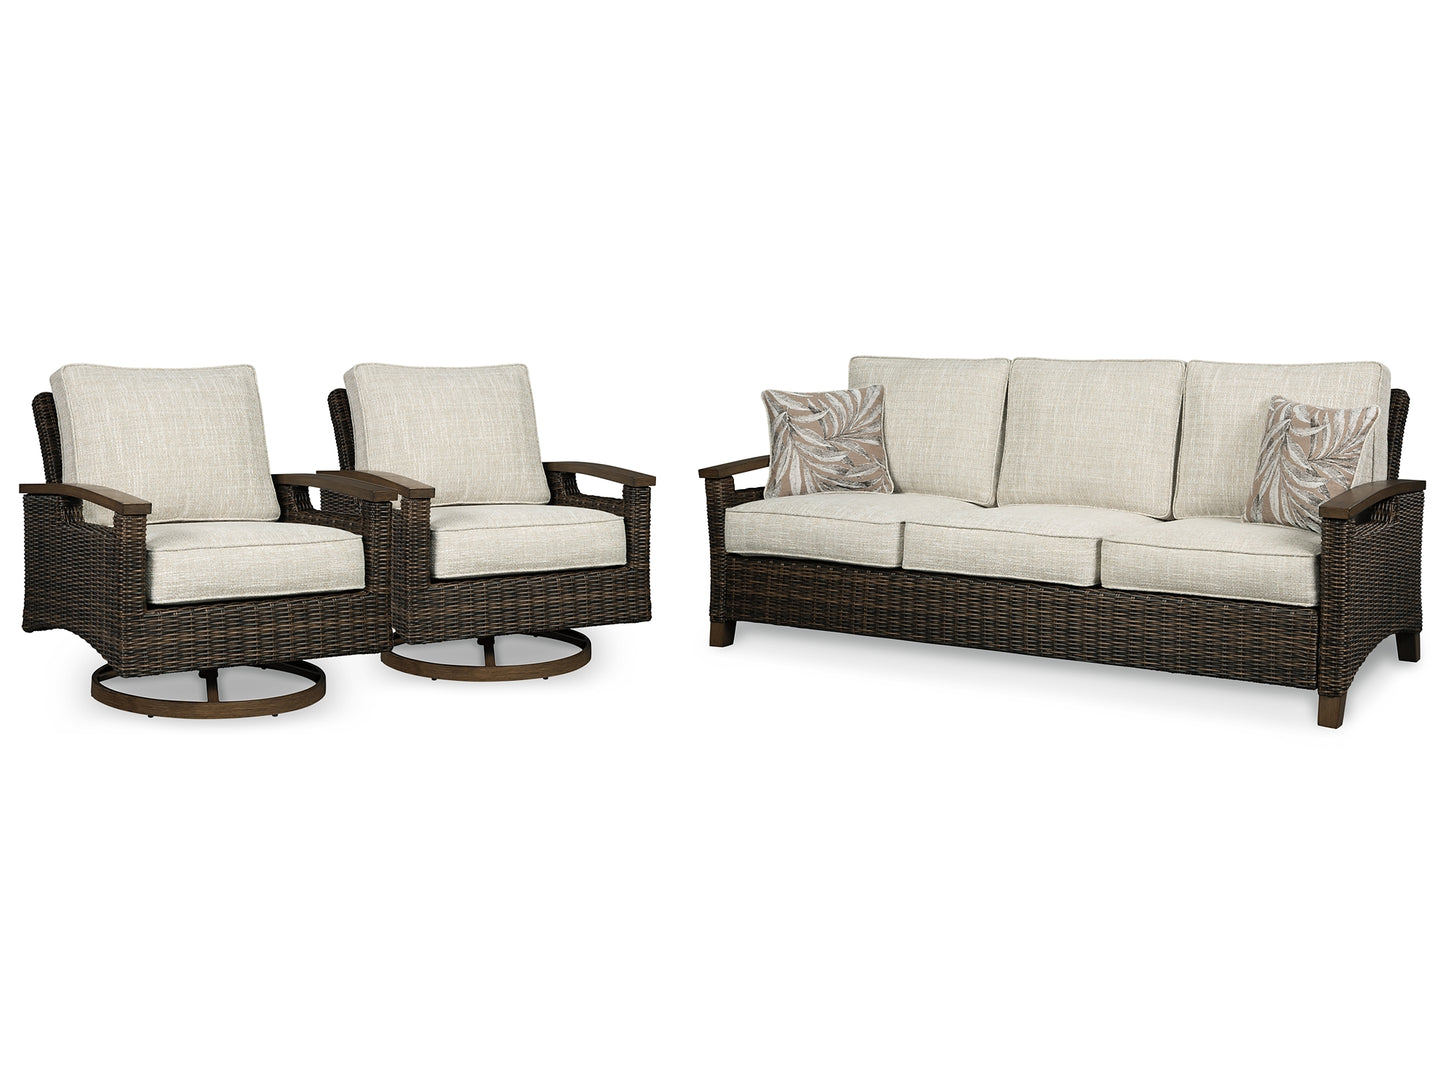 Paradise Trail Outdoor Sofa with 2 Lounge Chairs Wilson Furniture (OH)  in Bridgeport, Ohio. Serving Bridgeport, Yorkville, Bellaire, & Avondale